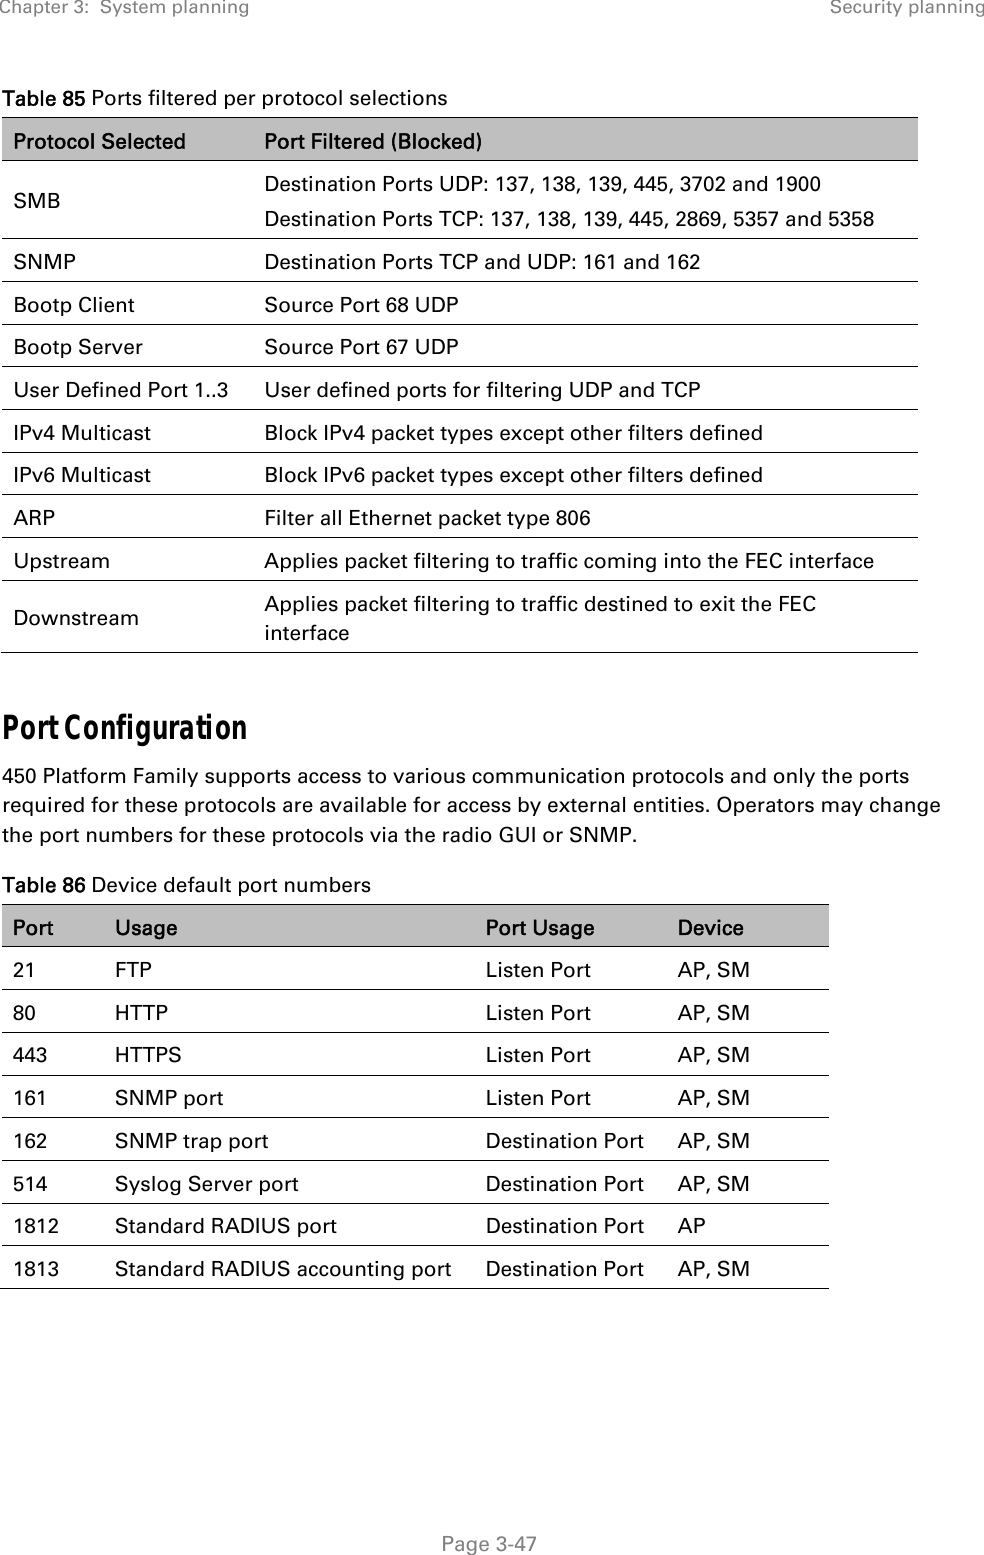 Chapter 3:  System planning  Security planning   Page 3-47 Table 85 Ports filtered per protocol selections   Port Configuration 450 Platform Family supports access to various communication protocols and only the ports required for these protocols are available for access by external entities. Operators may change the port numbers for these protocols via the radio GUI or SNMP. Table 86 Device default port numbers Port  Usage  Port Usage  Device 21 FTP  Listen Port  AP, SM 80 HTTP  Listen Port  AP, SM 443 HTTPS  Listen Port  AP, SM 161  SNMP port  Listen Port  AP, SM 162  SNMP trap port  Destination Port  AP, SM 514  Syslog Server port  Destination Port  AP, SM 1812  Standard RADIUS port  Destination Port  AP 1813  Standard RADIUS accounting port  Destination Port  AP, SM    Protocol Selected  Port Filtered (Blocked) SMB  Destination Ports UDP: 137, 138, 139, 445, 3702 and 1900 Destination Ports TCP: 137, 138, 139, 445, 2869, 5357 and 5358 SNMP  Destination Ports TCP and UDP: 161 and 162 Bootp Client  Source Port 68 UDP Bootp Server  Source Port 67 UDP User Defined Port 1..3  User defined ports for filtering UDP and TCP IPv4 Multicast  Block IPv4 packet types except other filters defined IPv6 Multicast  Block IPv6 packet types except other filters defined ARP  Filter all Ethernet packet type 806 Upstream   Applies packet filtering to traffic coming into the FEC interface Downstream  Applies packet filtering to traffic destined to exit the FEC interface 